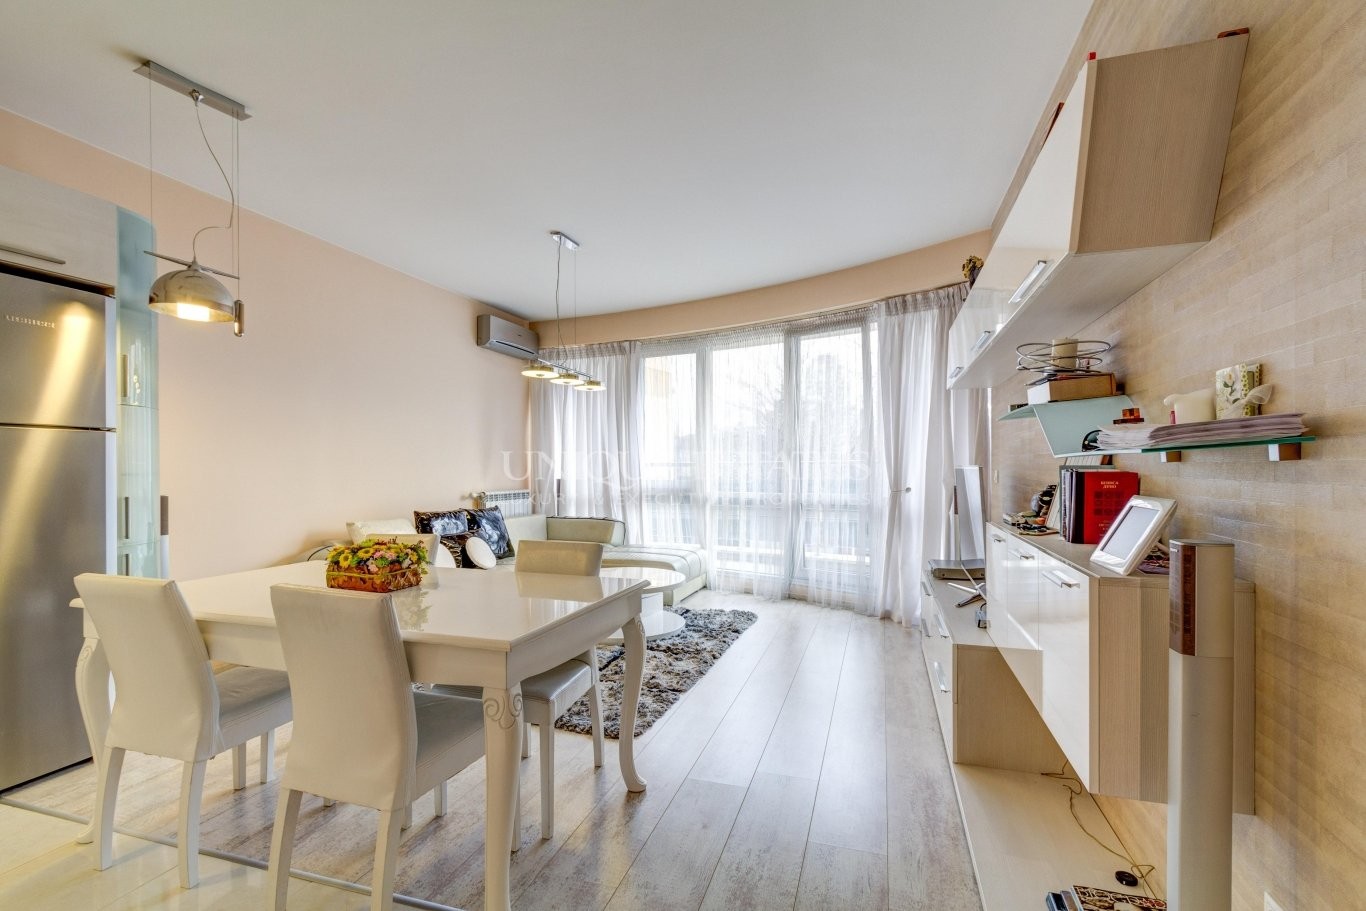 Apartment for sale in Sofia, Iztok with listing ID: K6162 - image 1